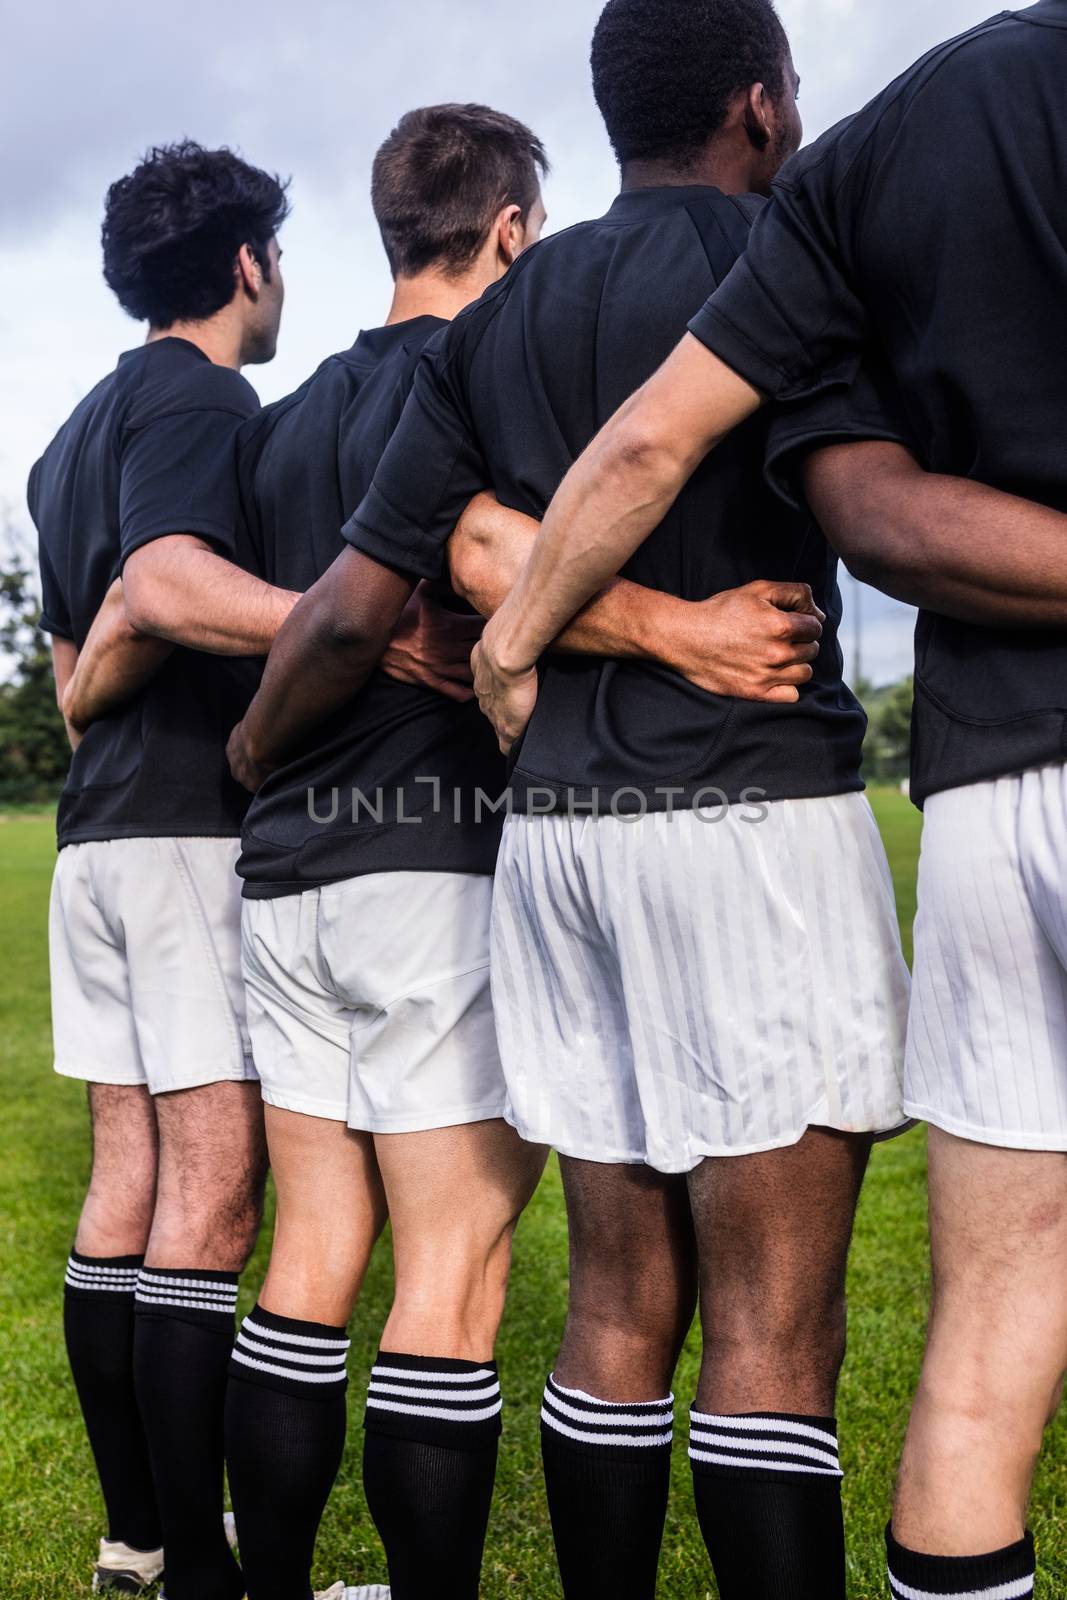 Rugby players standing together before match at the park